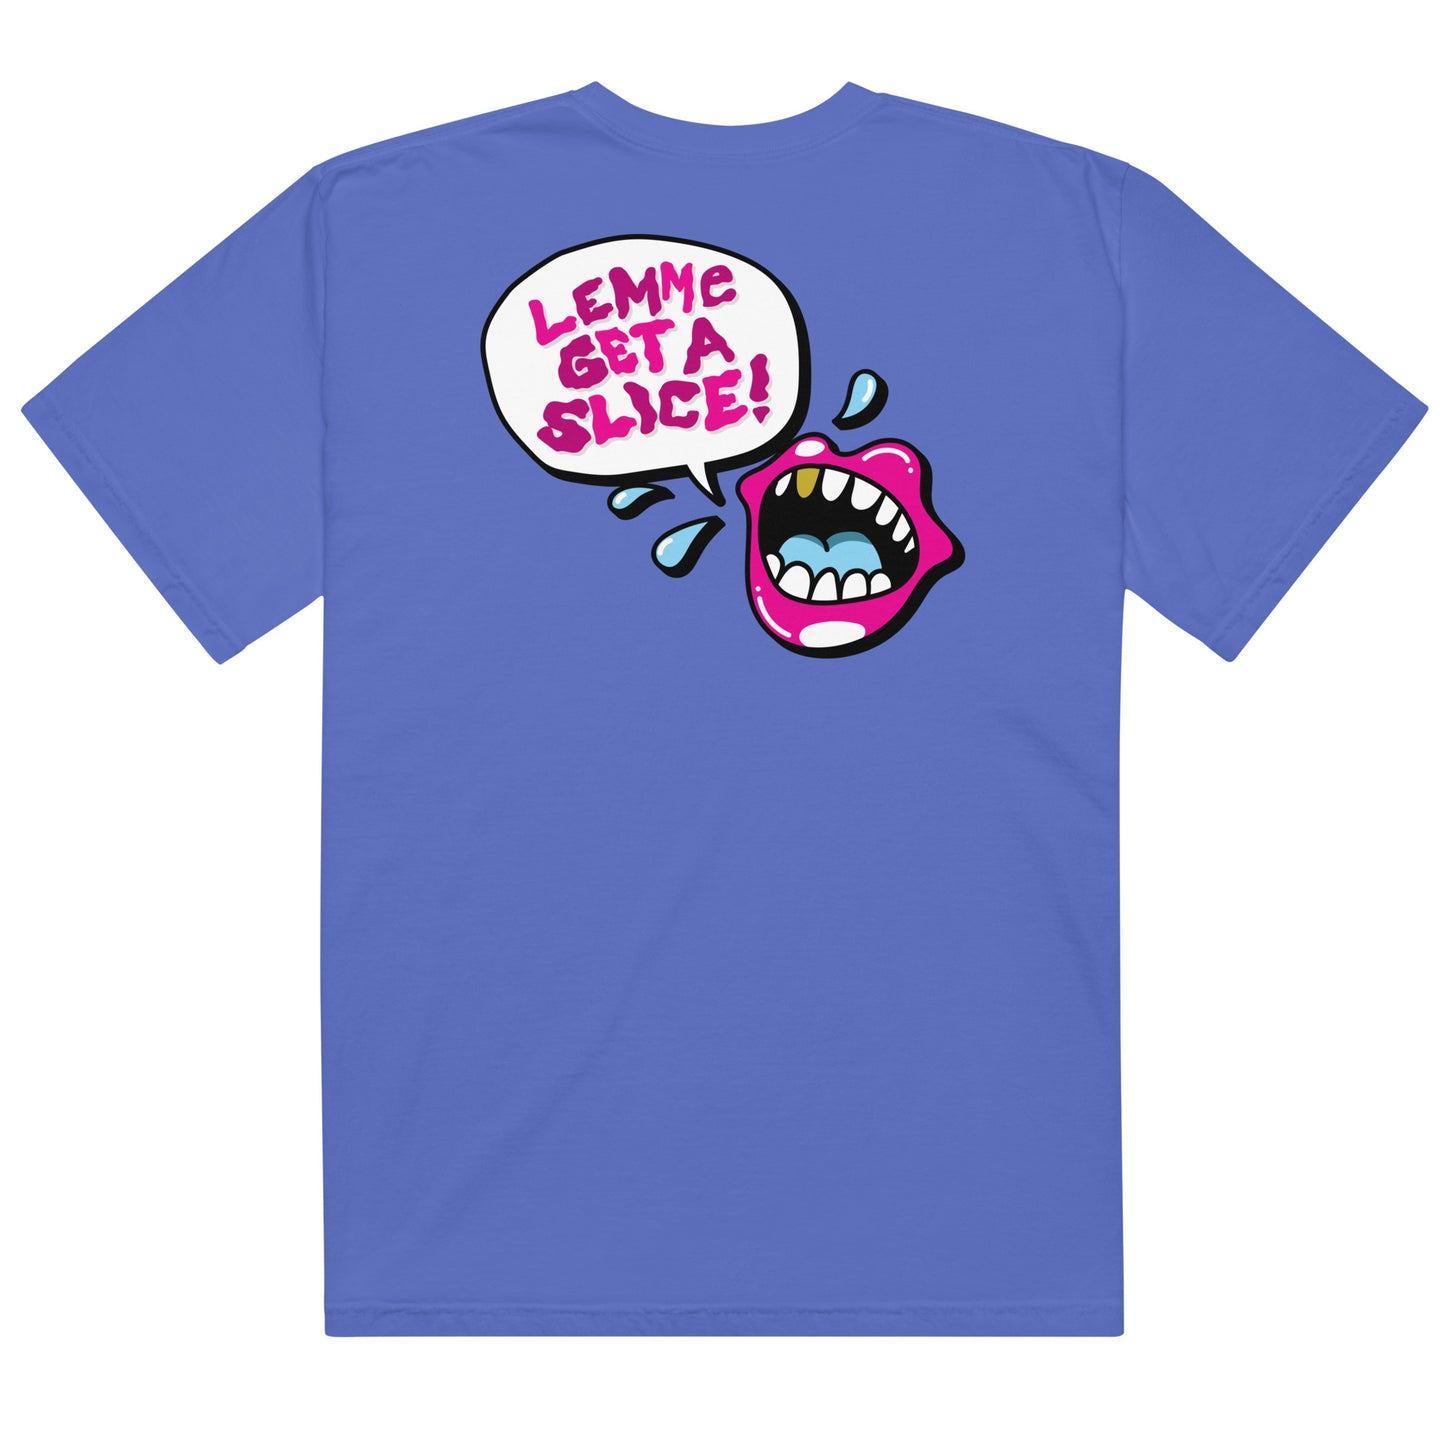 Ultra Slice - Say What? Tee